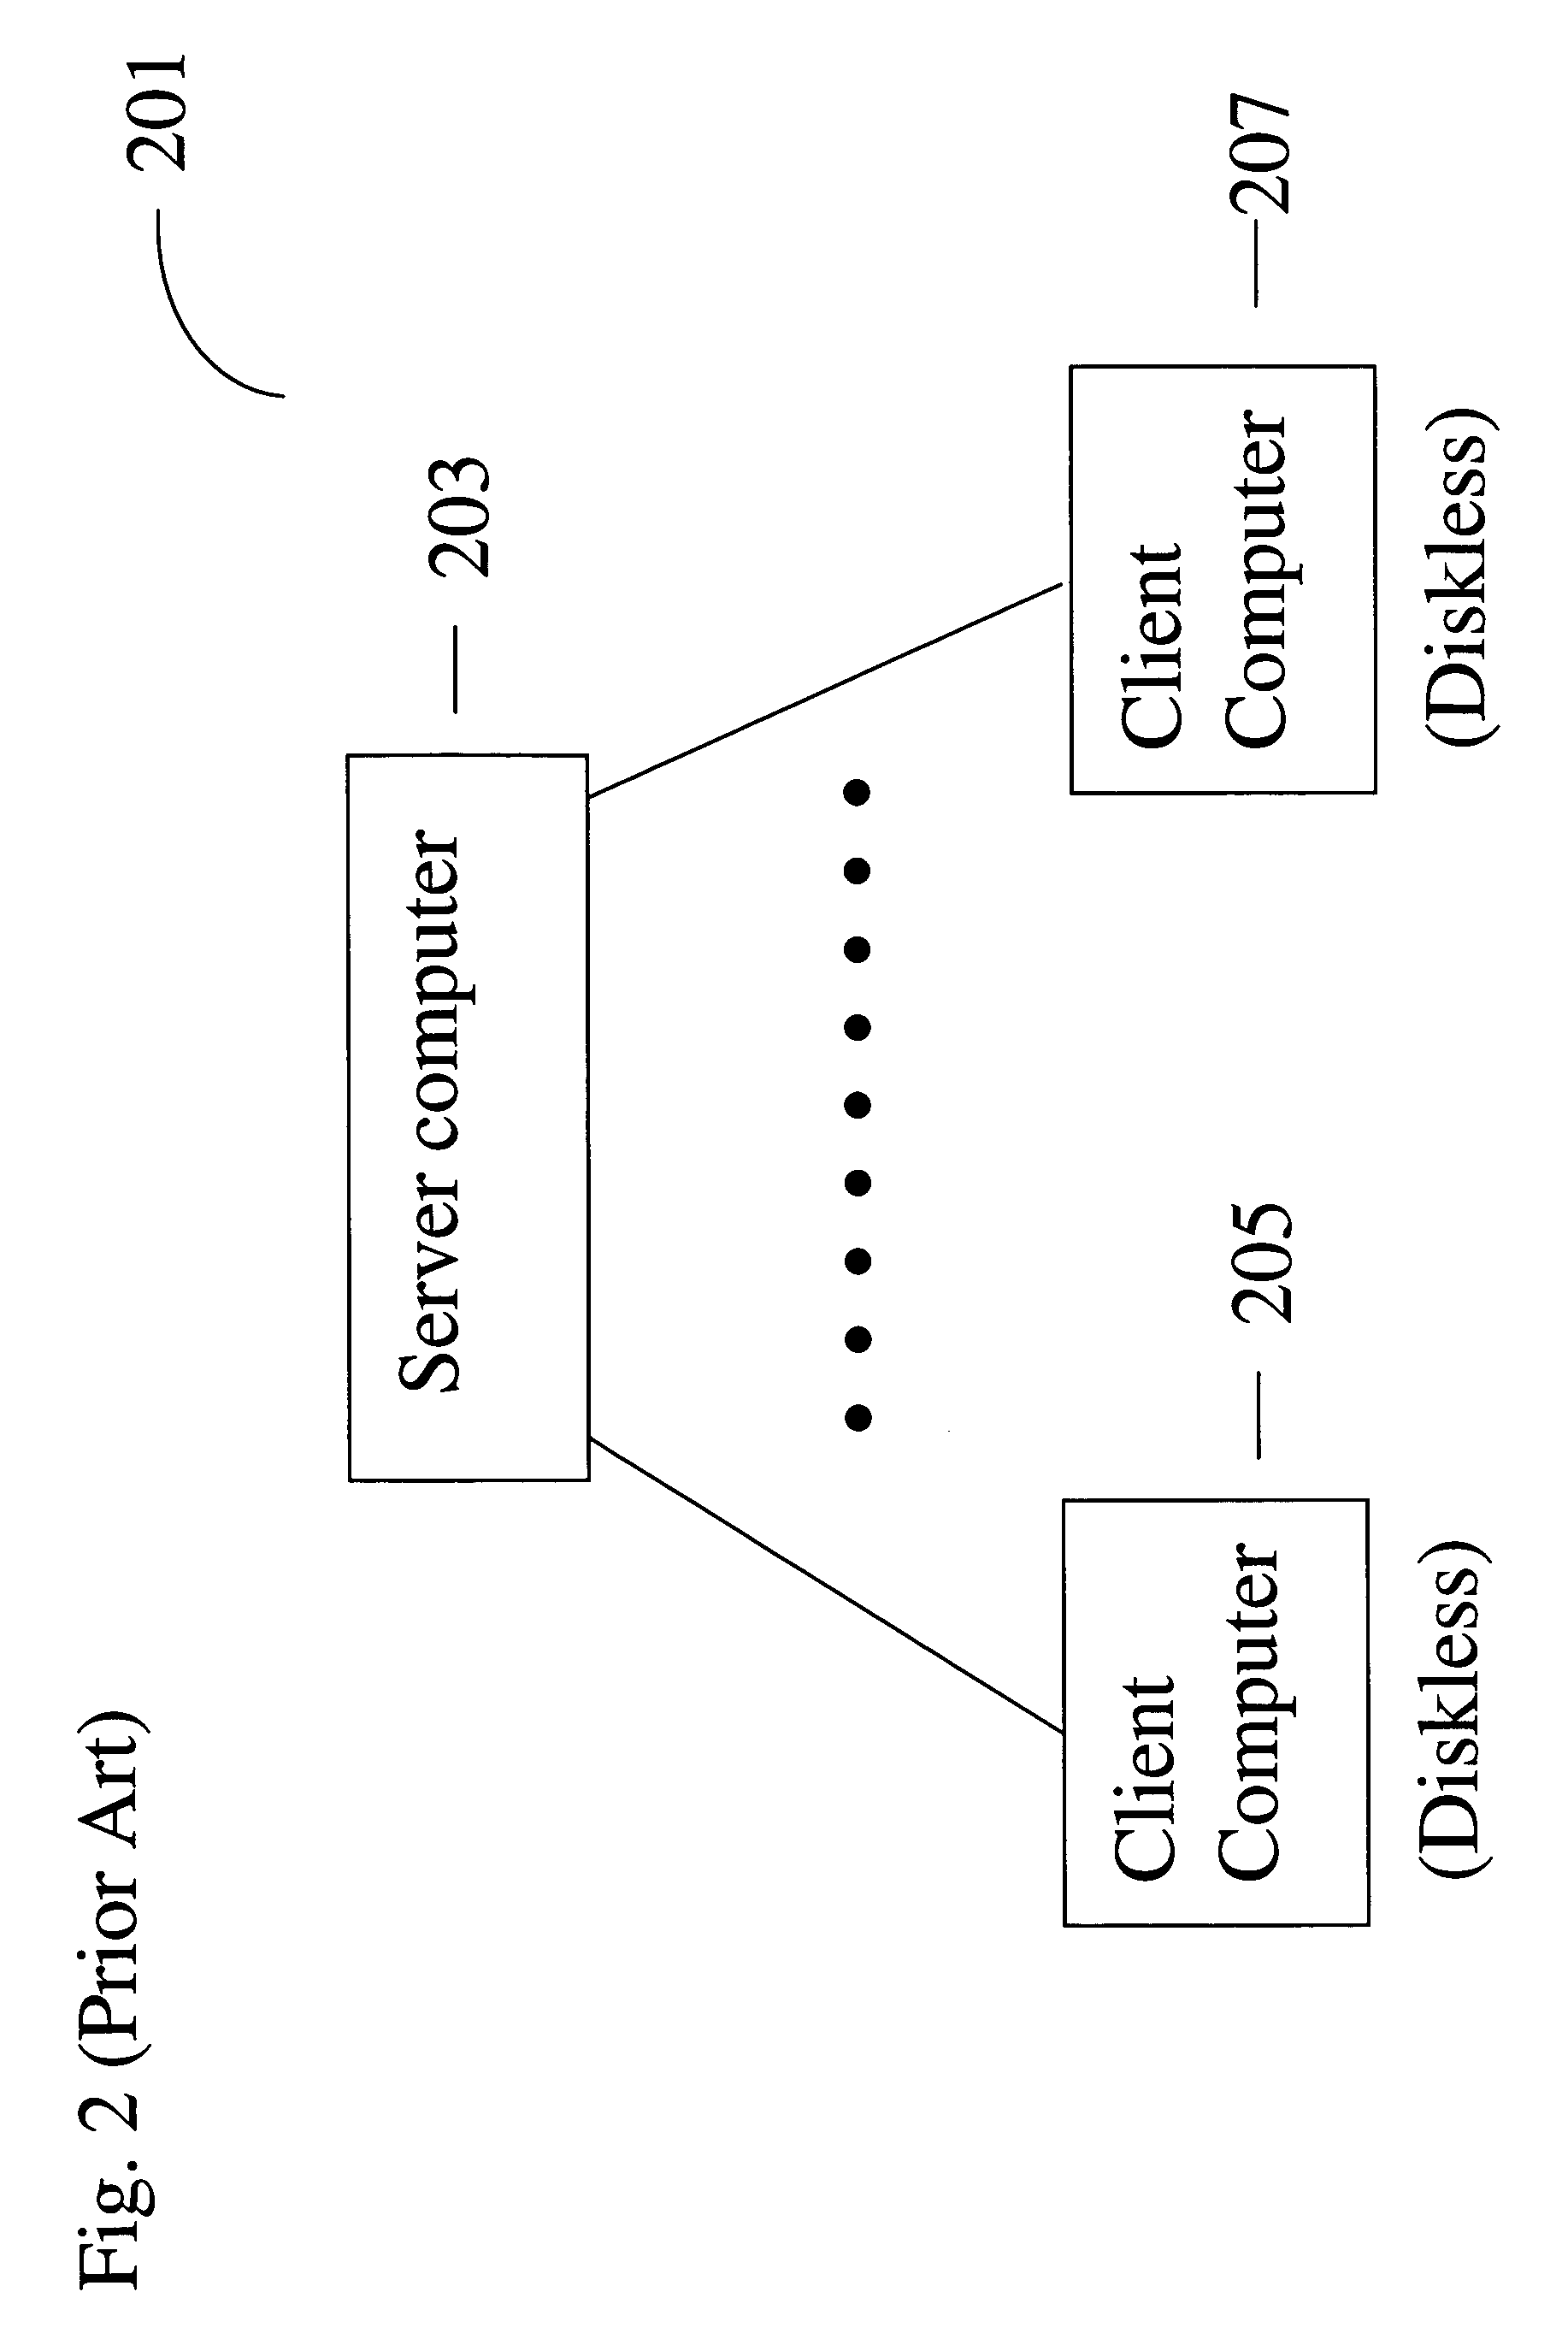 System, method, and medium for configuring client computers to operate disconnected from a server computer while using a master instance of the operating system